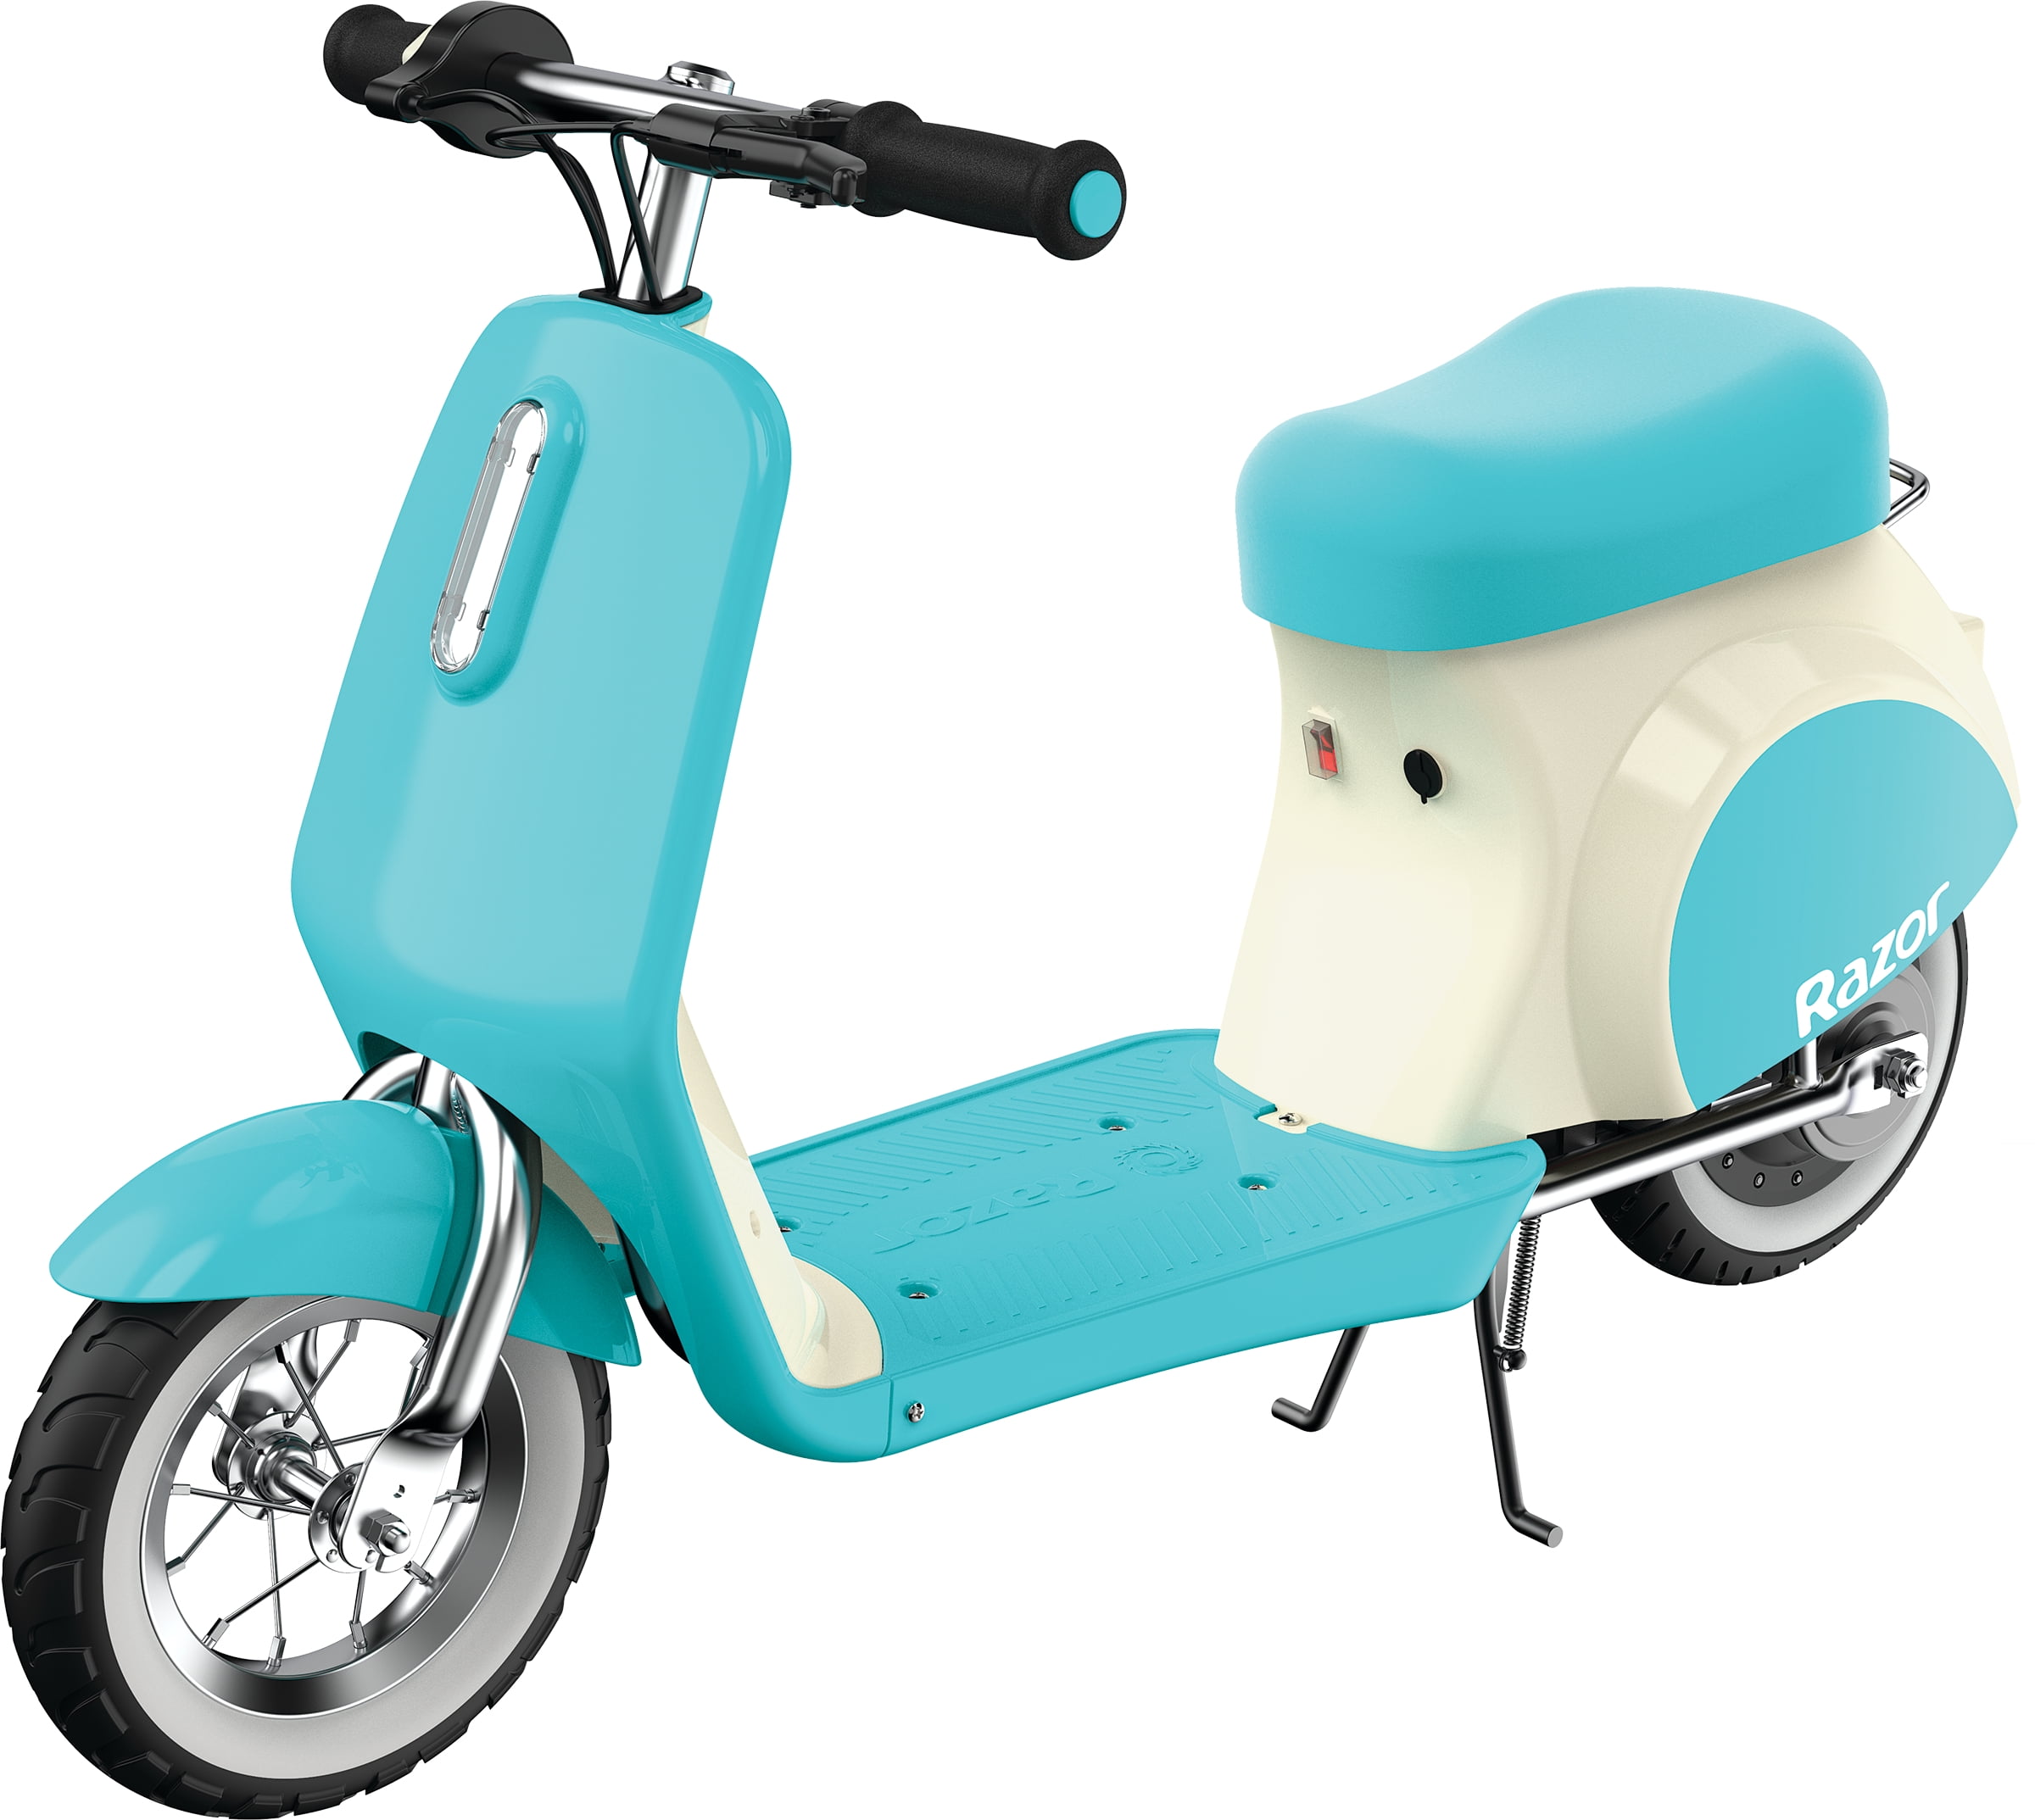 Øst Timor dash husdyr Razor Pocket Mod Petite - 12V Miniature Euro-Style Electric Scooter for  Girls Ages 7+, Hub-Driven Motor, Air-Filled White Wall Tires, Up to 40 min  Ride Time - Walmart.com